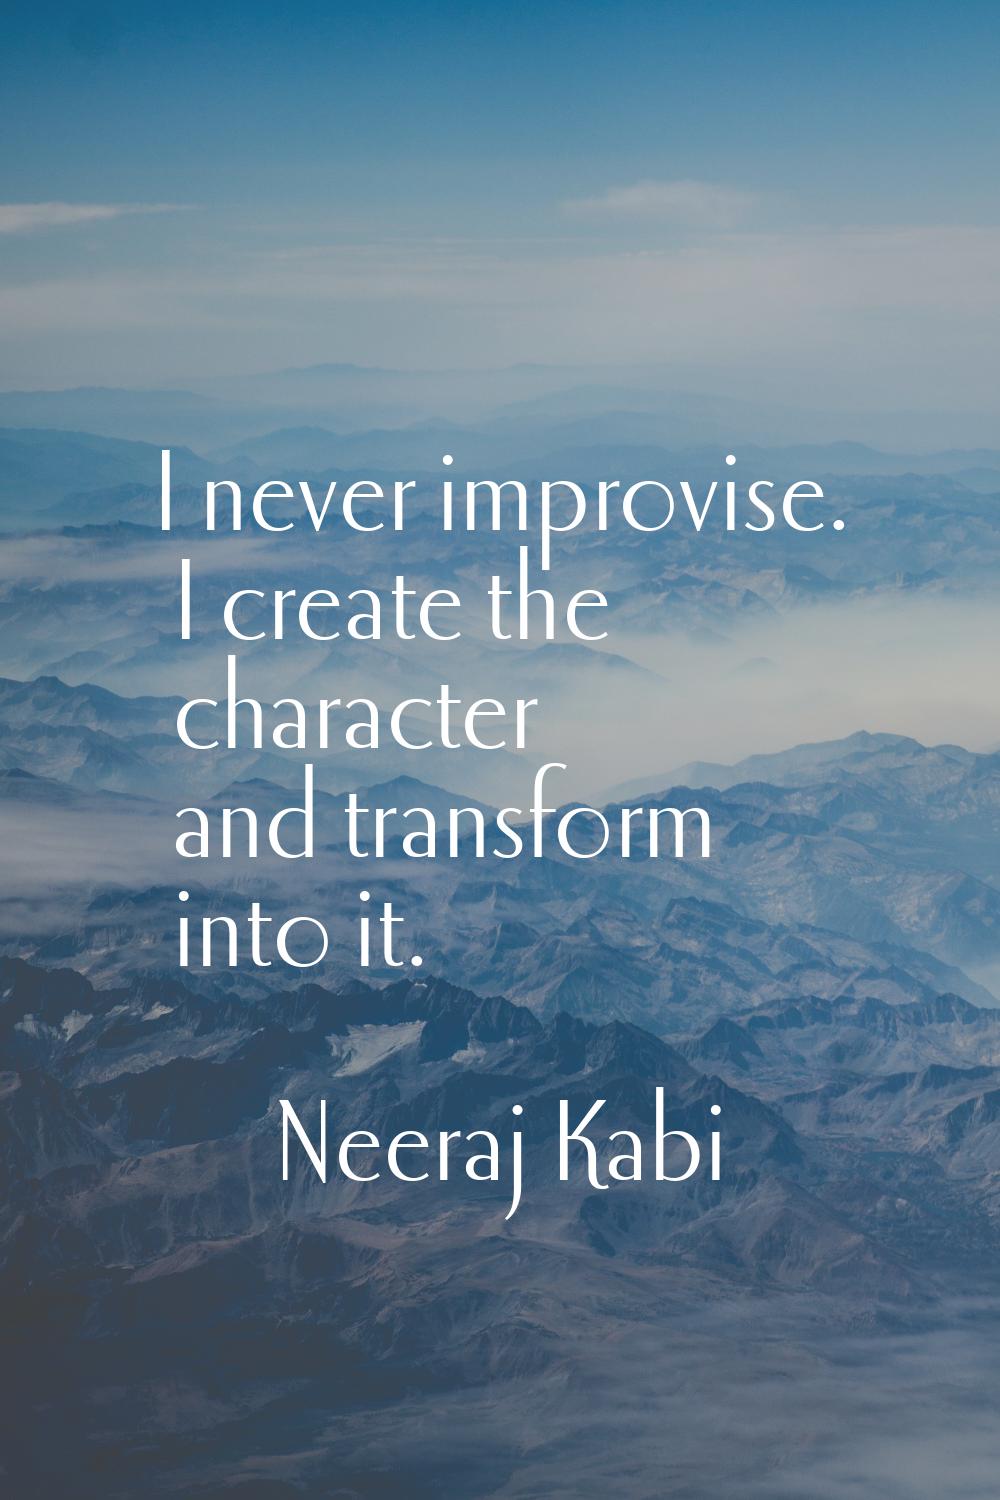 I never improvise. I create the character and transform into it.